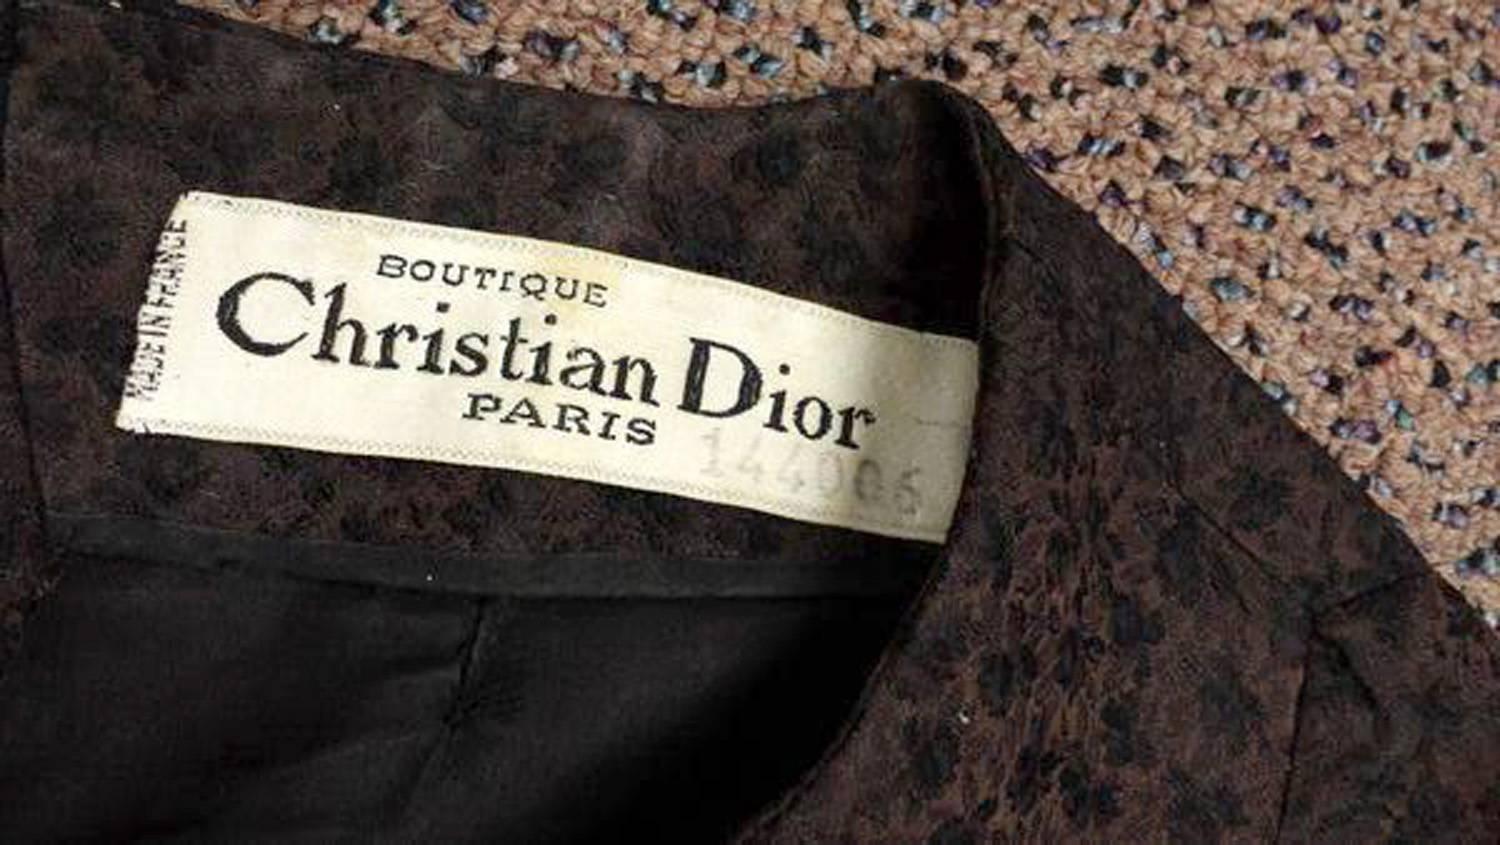 New Look Refined. 1950's Christian Dior dress in dark brown (#144006) with black floral motifs. Dress features elbow length sleeves with three fabric buttons and sweet bow at center front of the bust which adds a touch of femininity. The dress